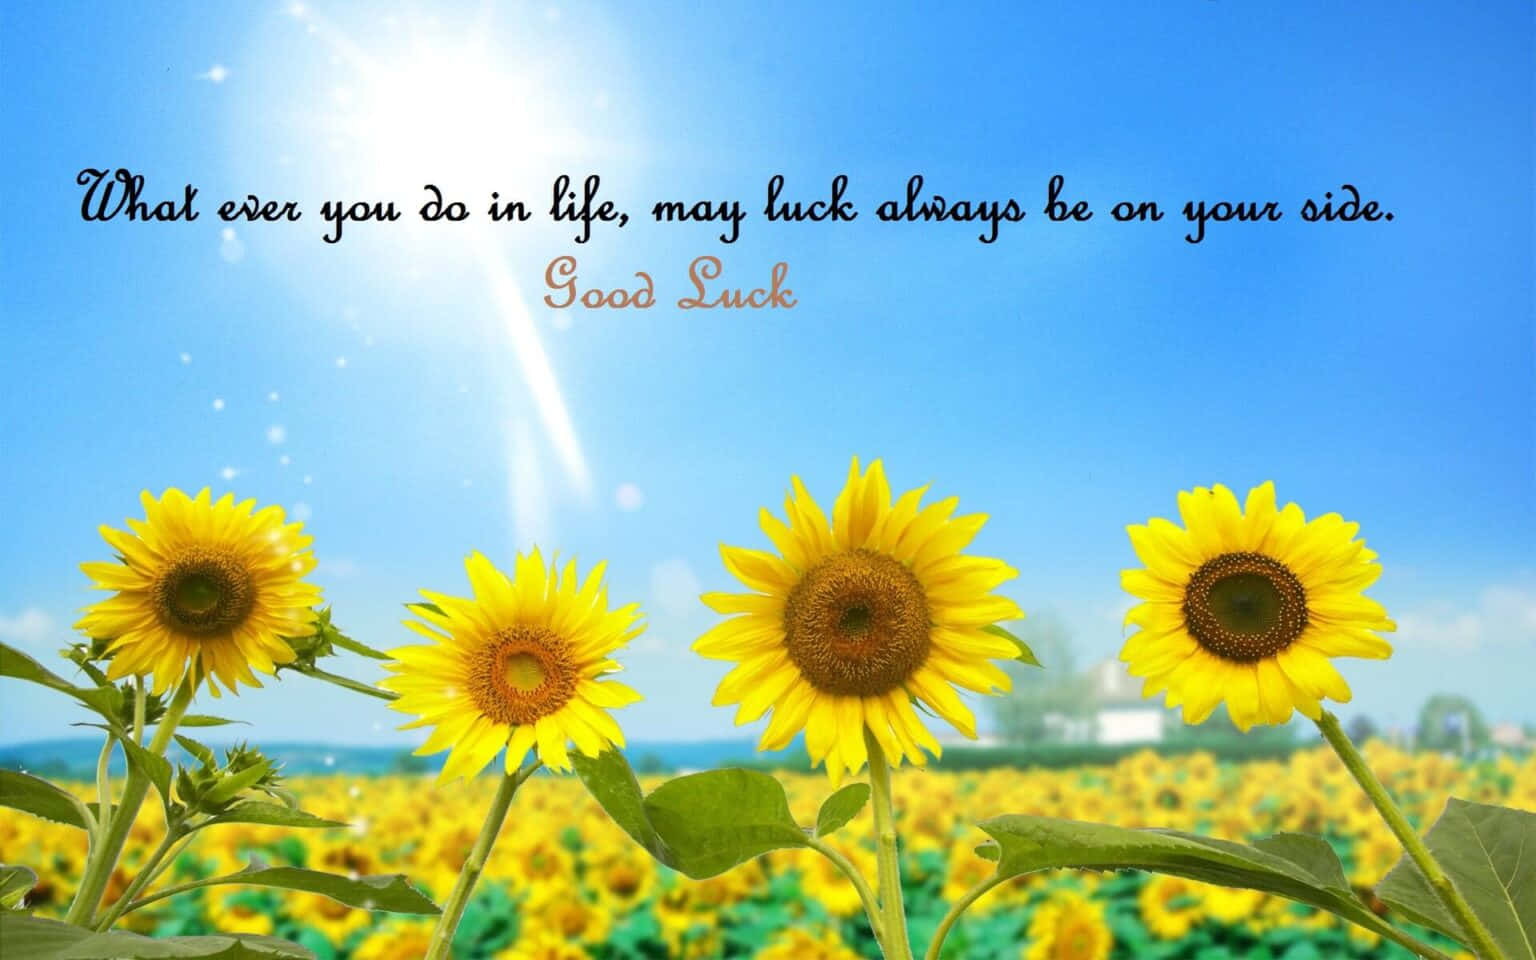 Make your own luck.